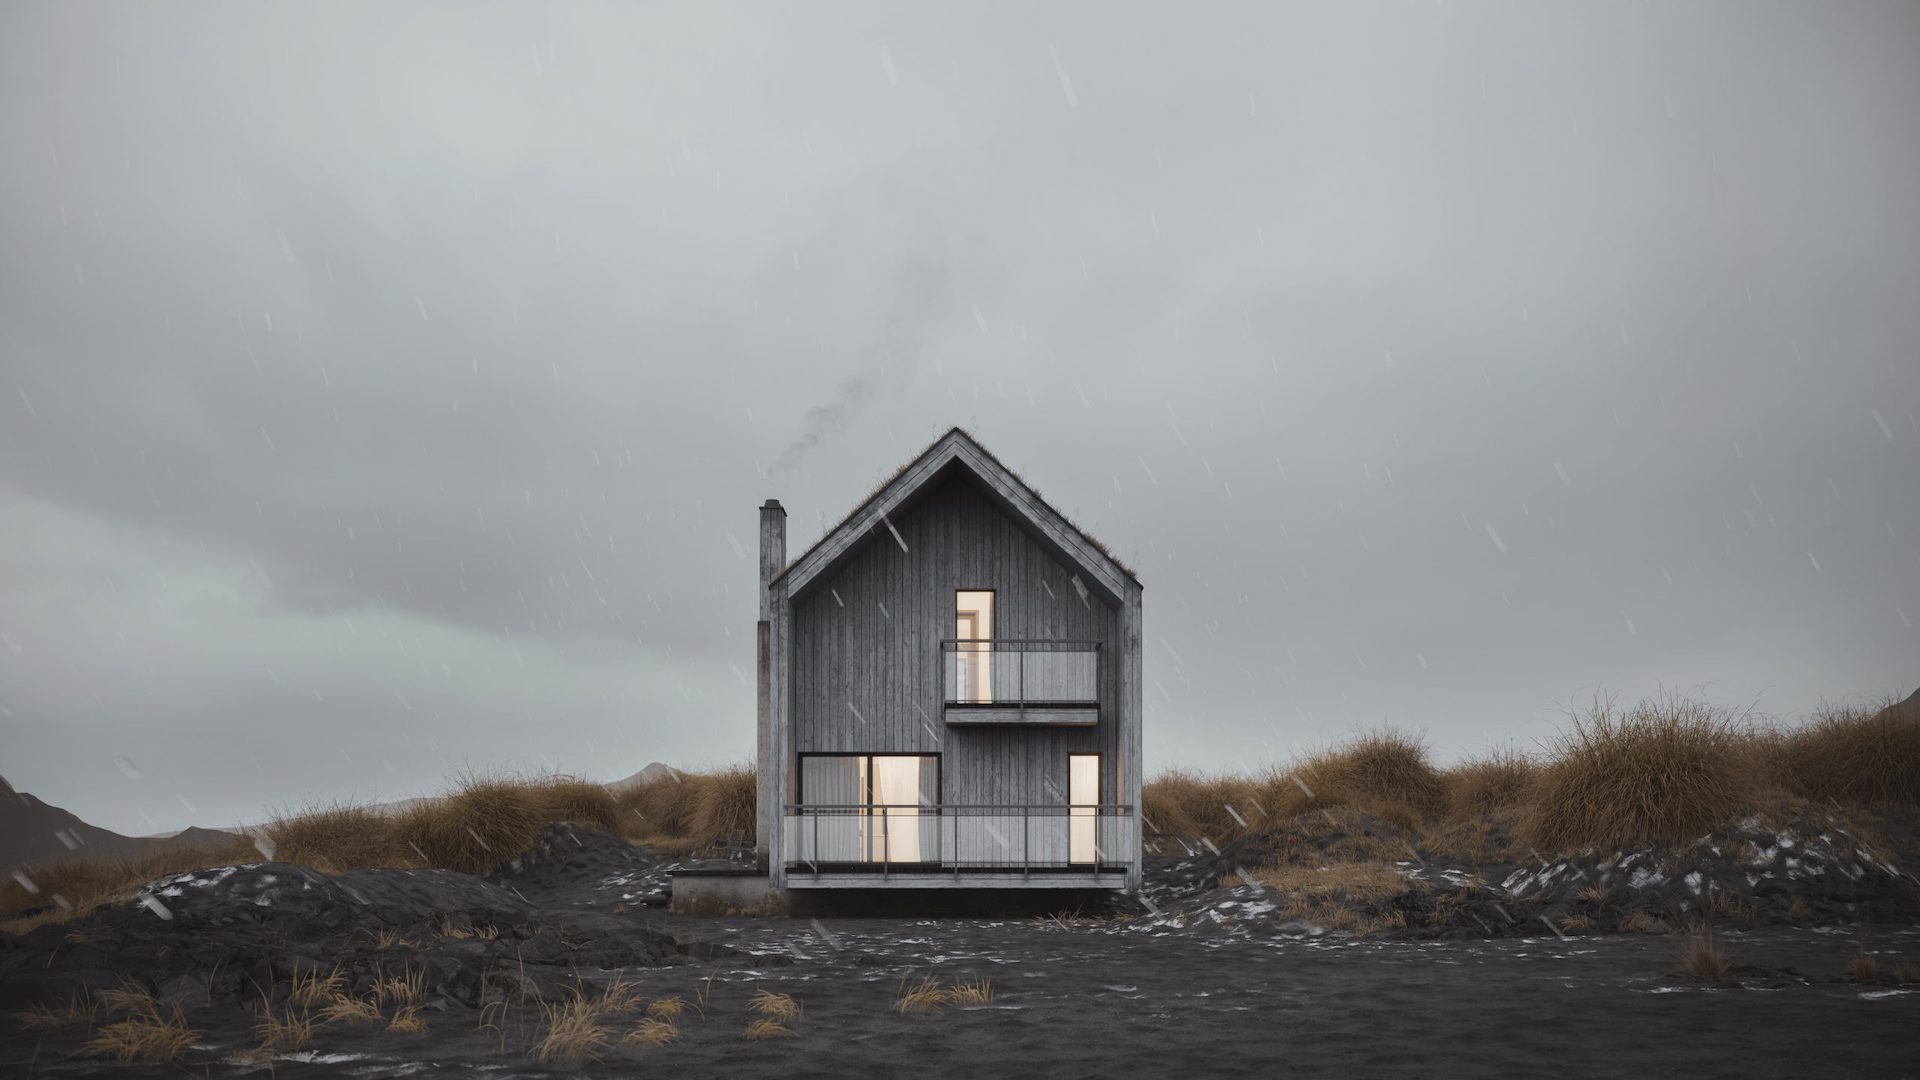 Architectural CG Visualization of a House in Rainy Weather